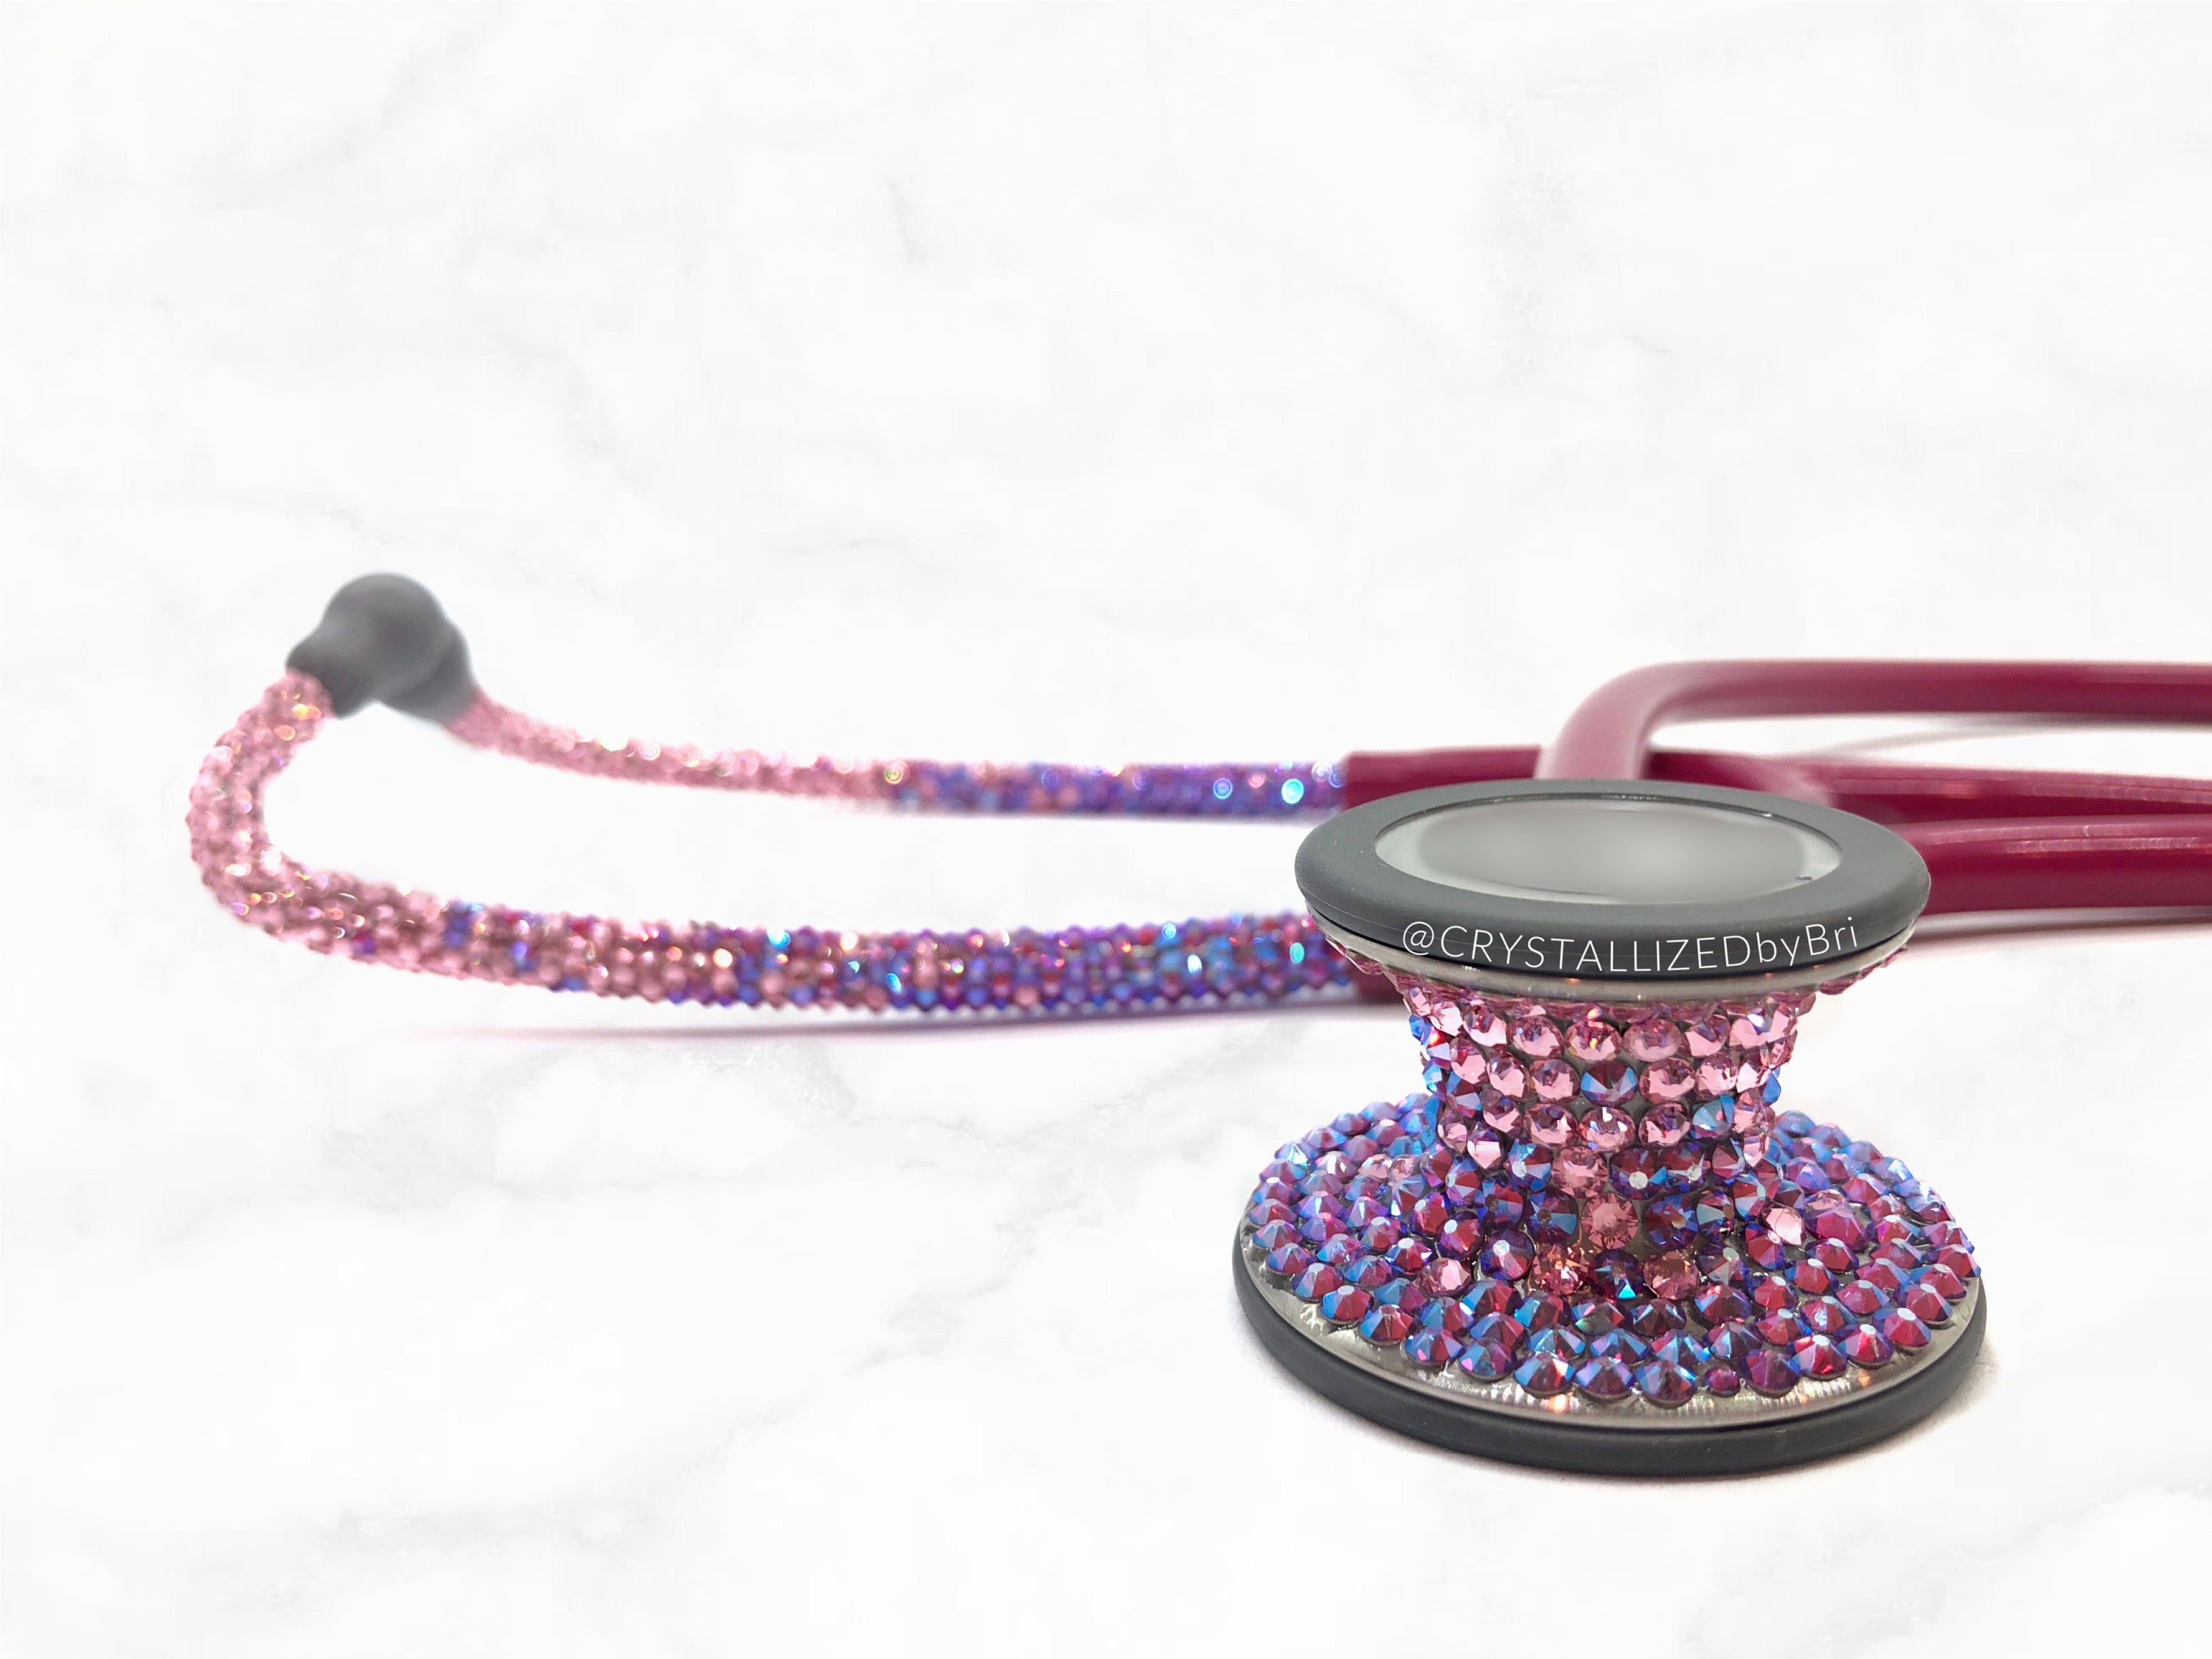 Ombre Cardiology IV Stethoscope W/ Genuine Crystals Medical - Etsy